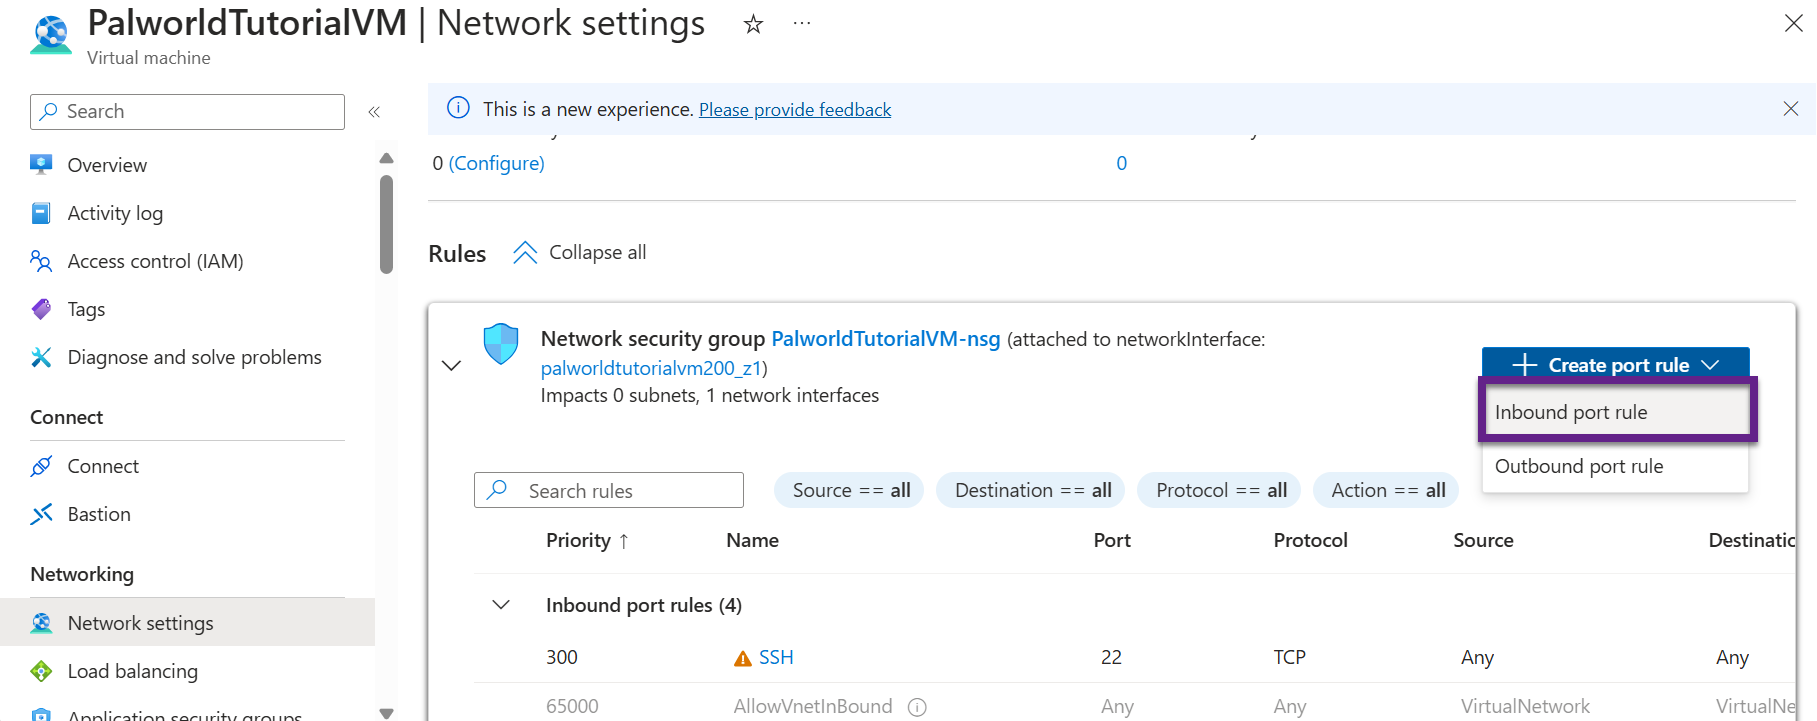 VM Network Settings page with the Inbound port rule option highlighted.